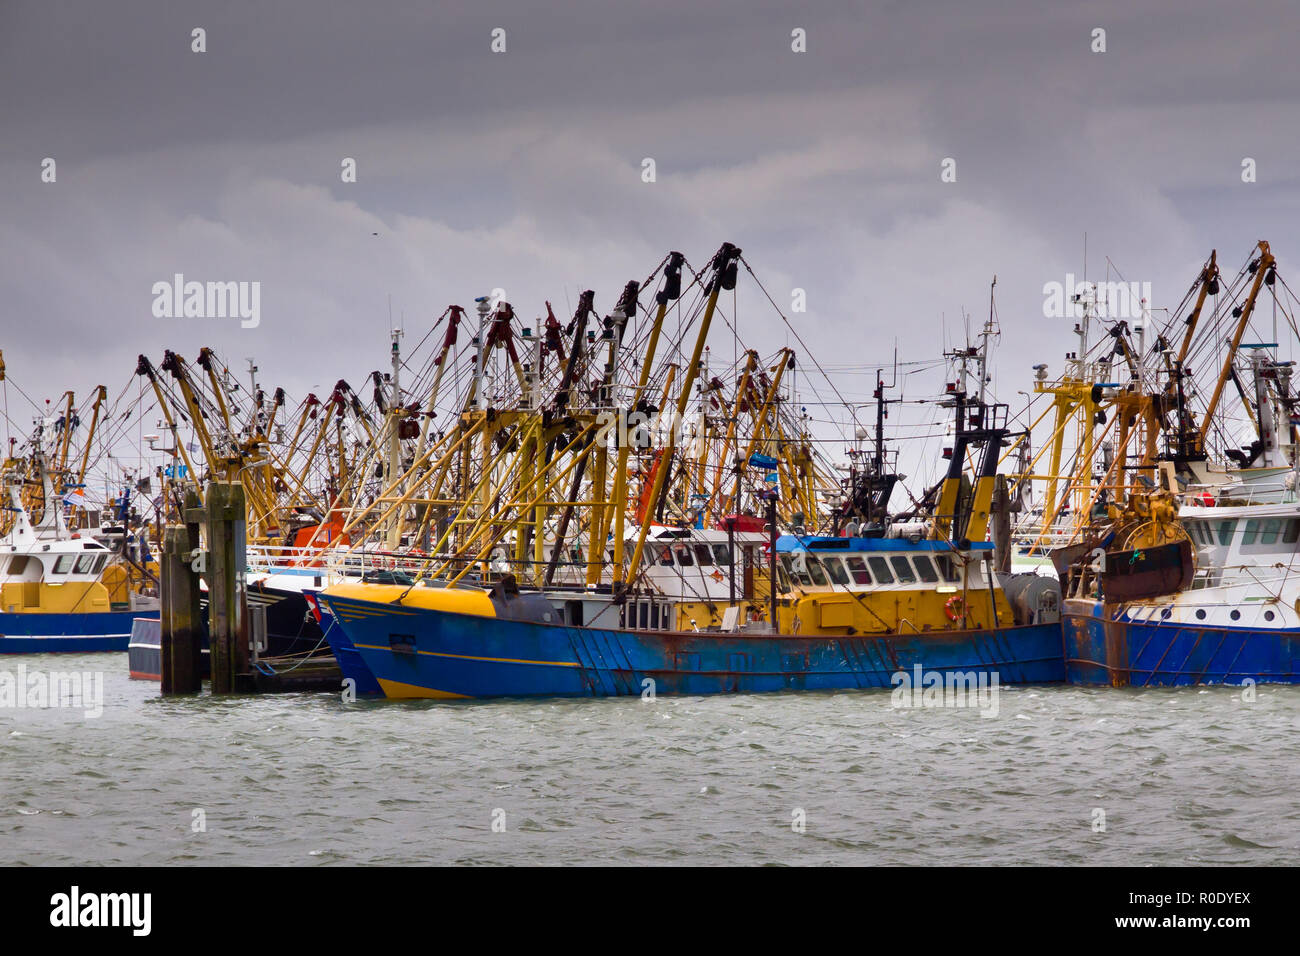 Fishing boats are waiting for the weather to clear up in a dutch harbor Stock Photo